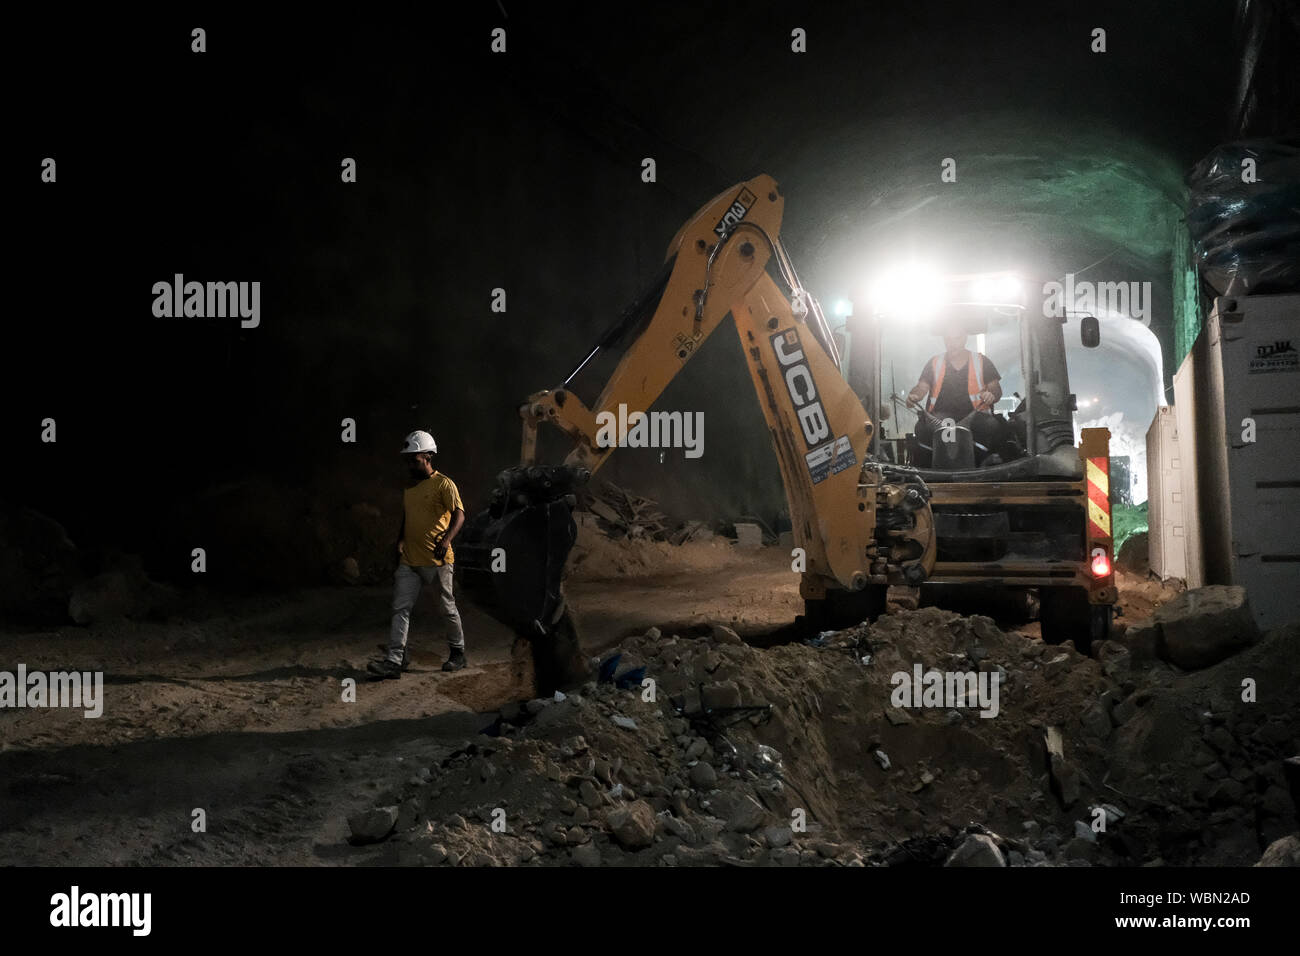 Jerusalem, Israel. 27th August, 2019. Rolzur Tunneling, commissioned by Hevra Kadisha Kehilat Yerushalaim, a Jewish burial society in Jerusalem, is nearing completion of a subterranean cemetery, in tunnels with a total length of 1.5 Km at a depth of a 15 floor building, housing over 30,000 graves, dug into the walls and floor of the structure. The $50 million project is expected to become operational in October 2019 and to provide a solution for diminishing real estate for Jewish burial in the city. Credit: Nir Alon/Alamy Live News. Stock Photo